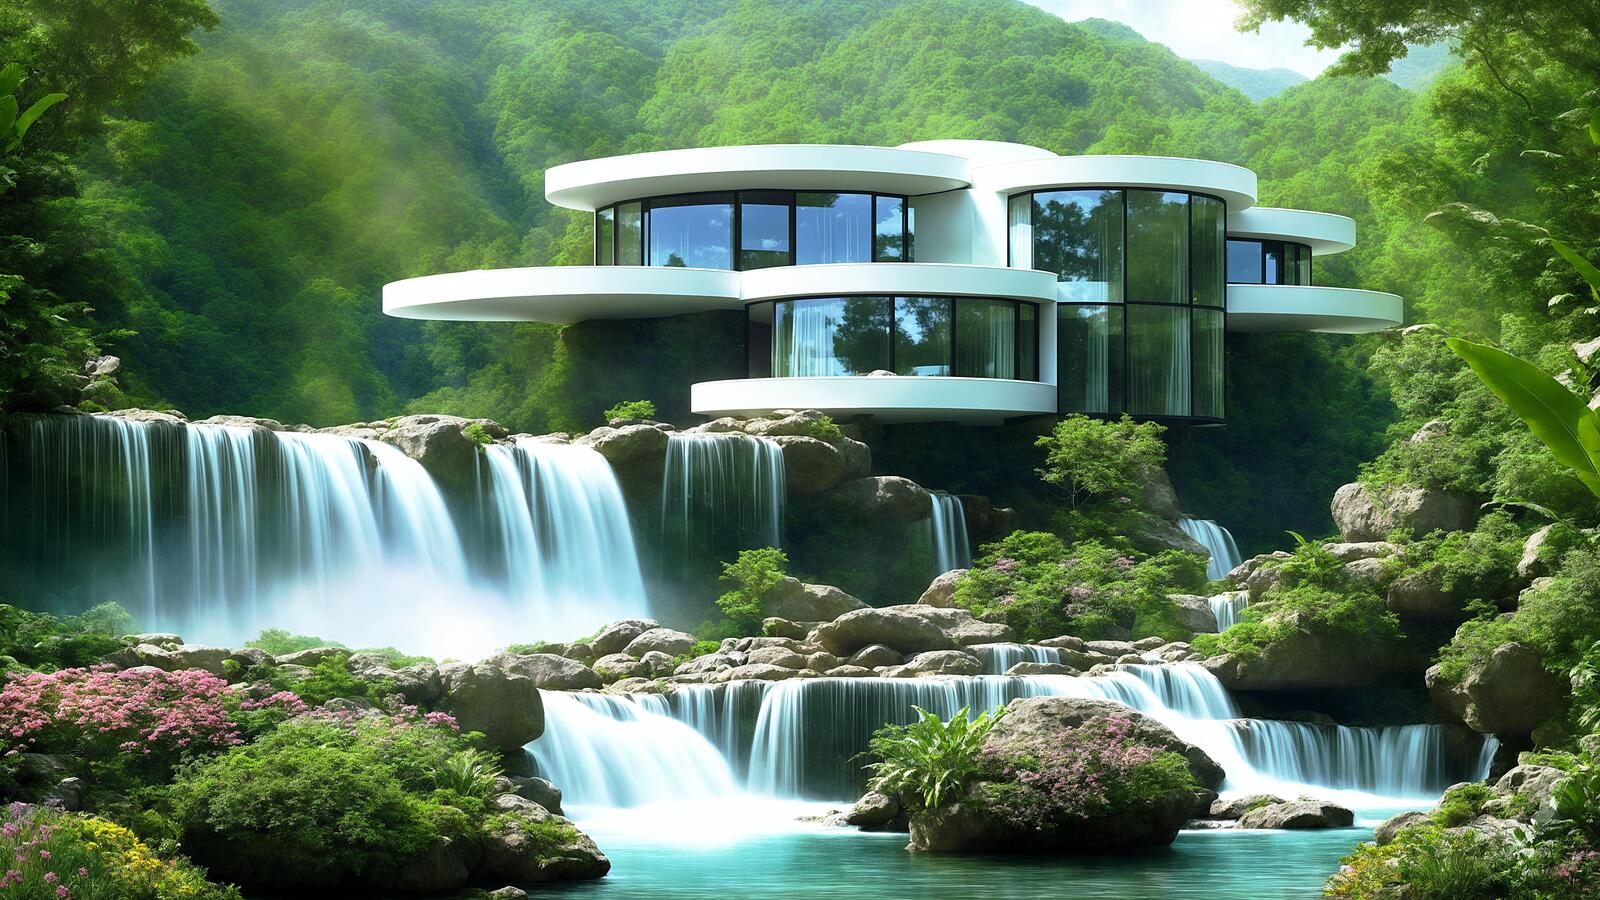 Free photo Beautiful villa with large windows built next to a waterfall in the forest